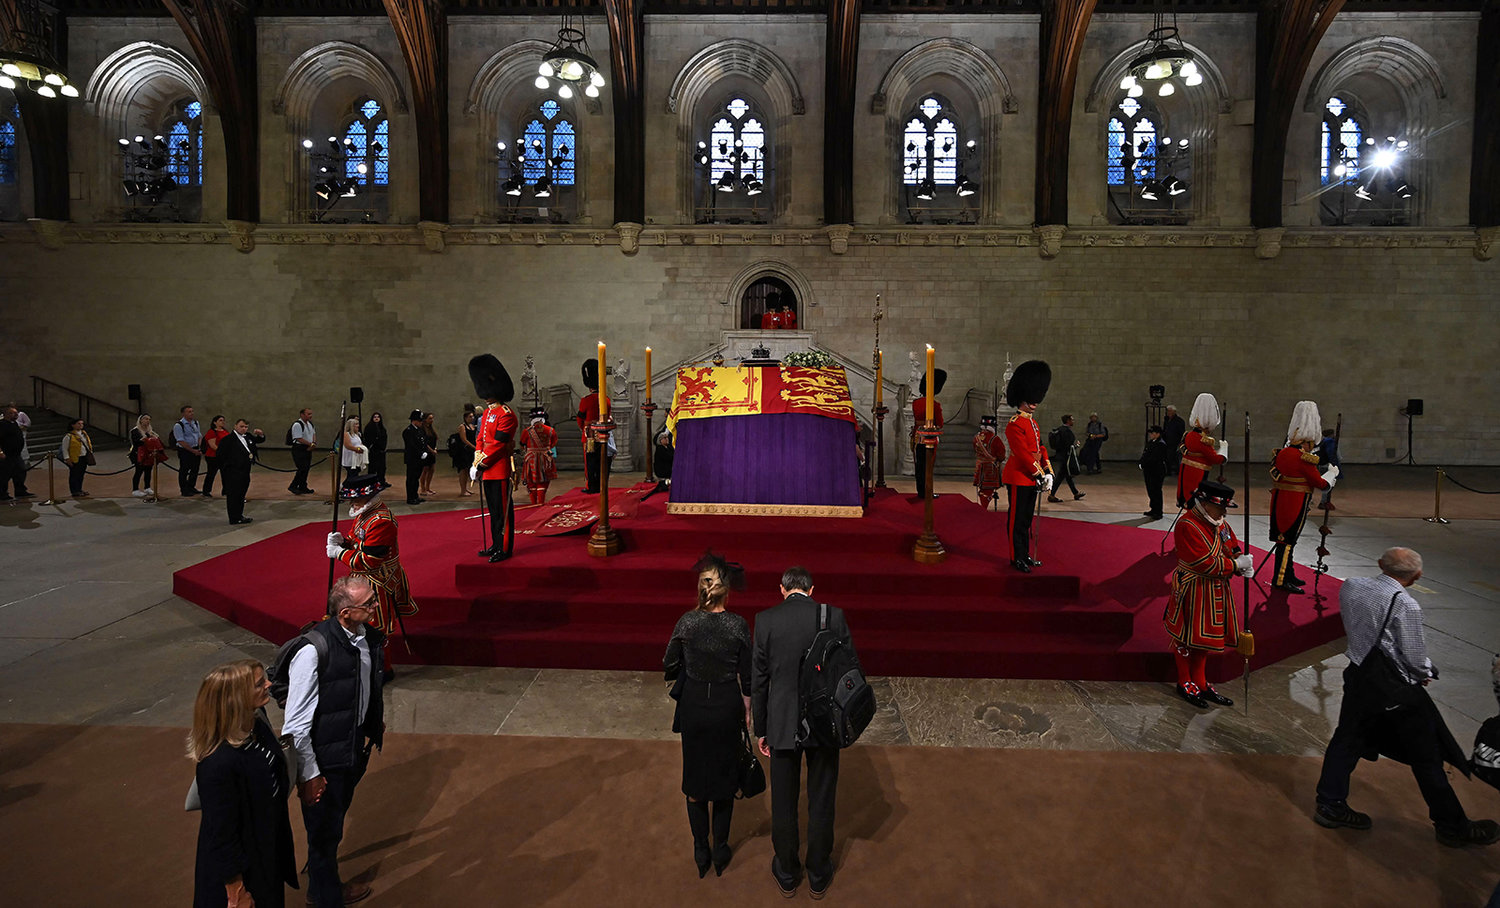 Members of the public file past the coffin of Queen Elizabeth II, inside Westminster Hall, at the Palace of Westminster, in London on Sept. 14, 2022, where it Lies in State on a Catafalque. (Ben Stansall/Pool/AFP via Getty Images/TNS)